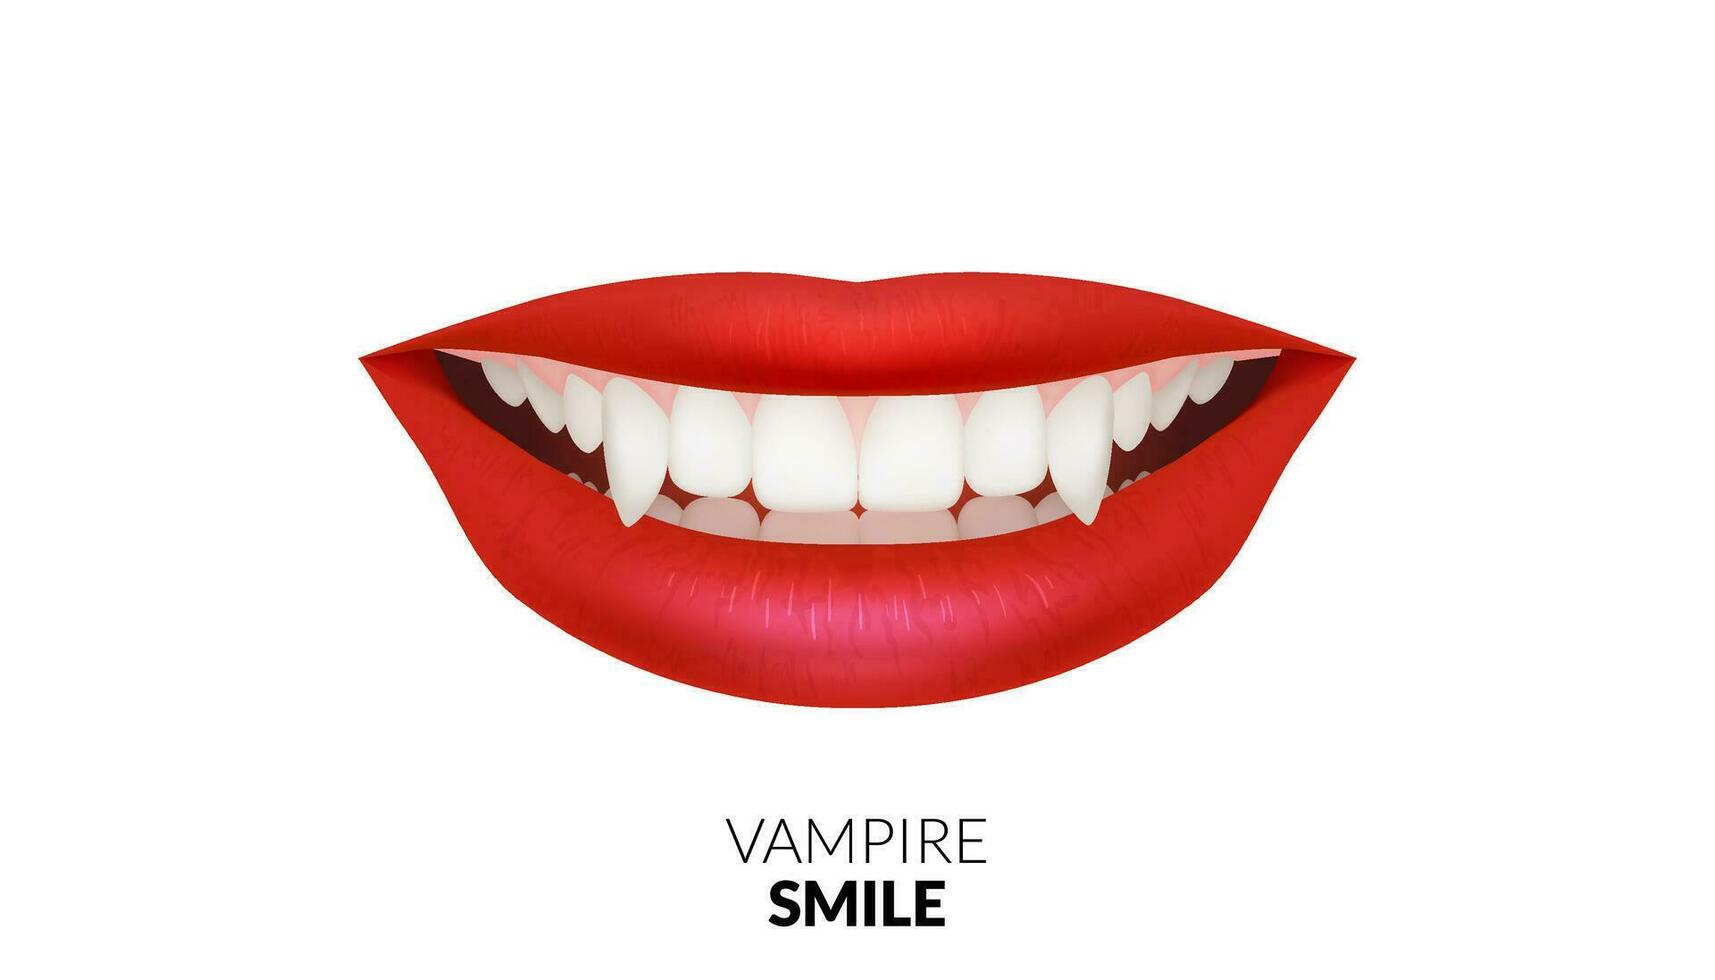 3D illustration featuring realistic red lips with vampire fangs and a captivating smile. Spooky beauty and horror elements, perfect for Halloween. Female vampire with sharp fangs and blood red lips vector